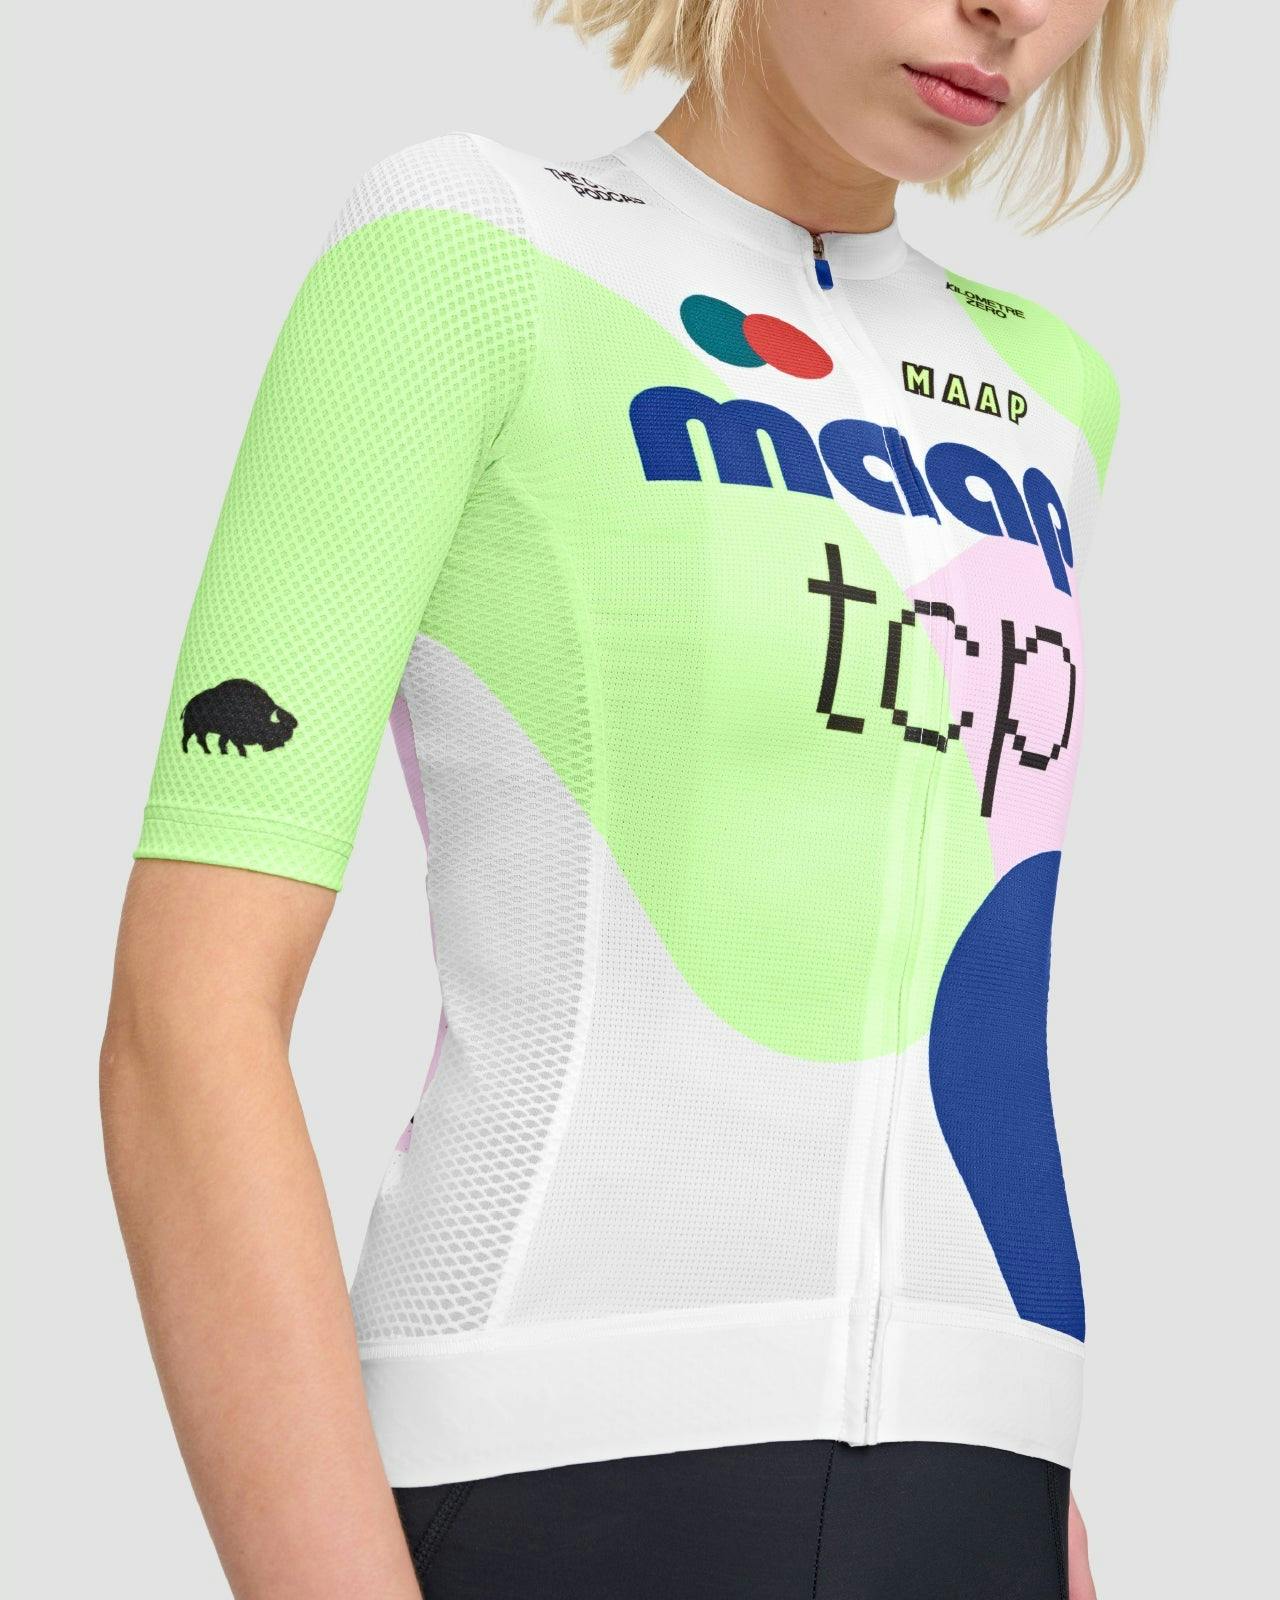 MAAP x The Cycling Podcast Women's Jersey | MAAP